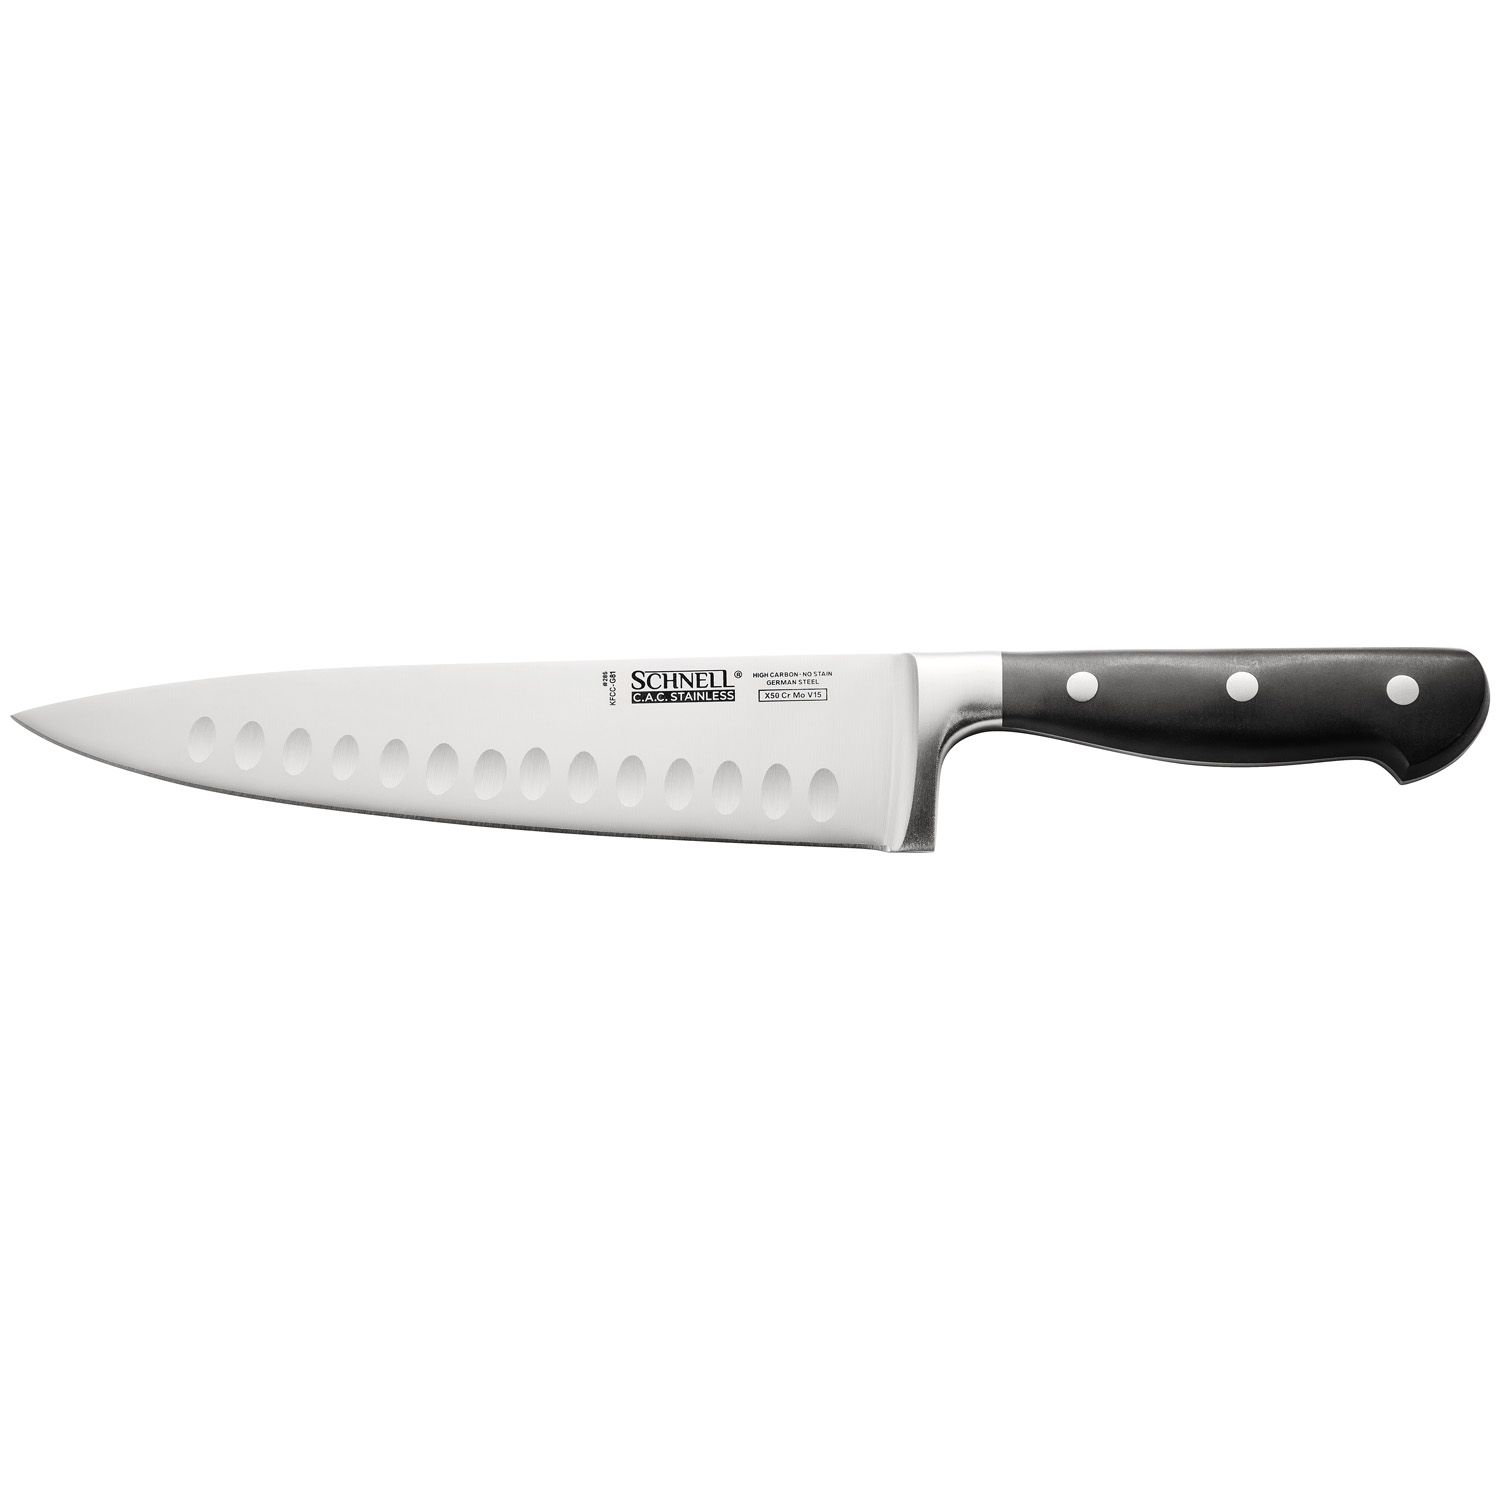 CAC China KFCC-G81 Schnell Forged Chef Knife with Granton Edge 8"